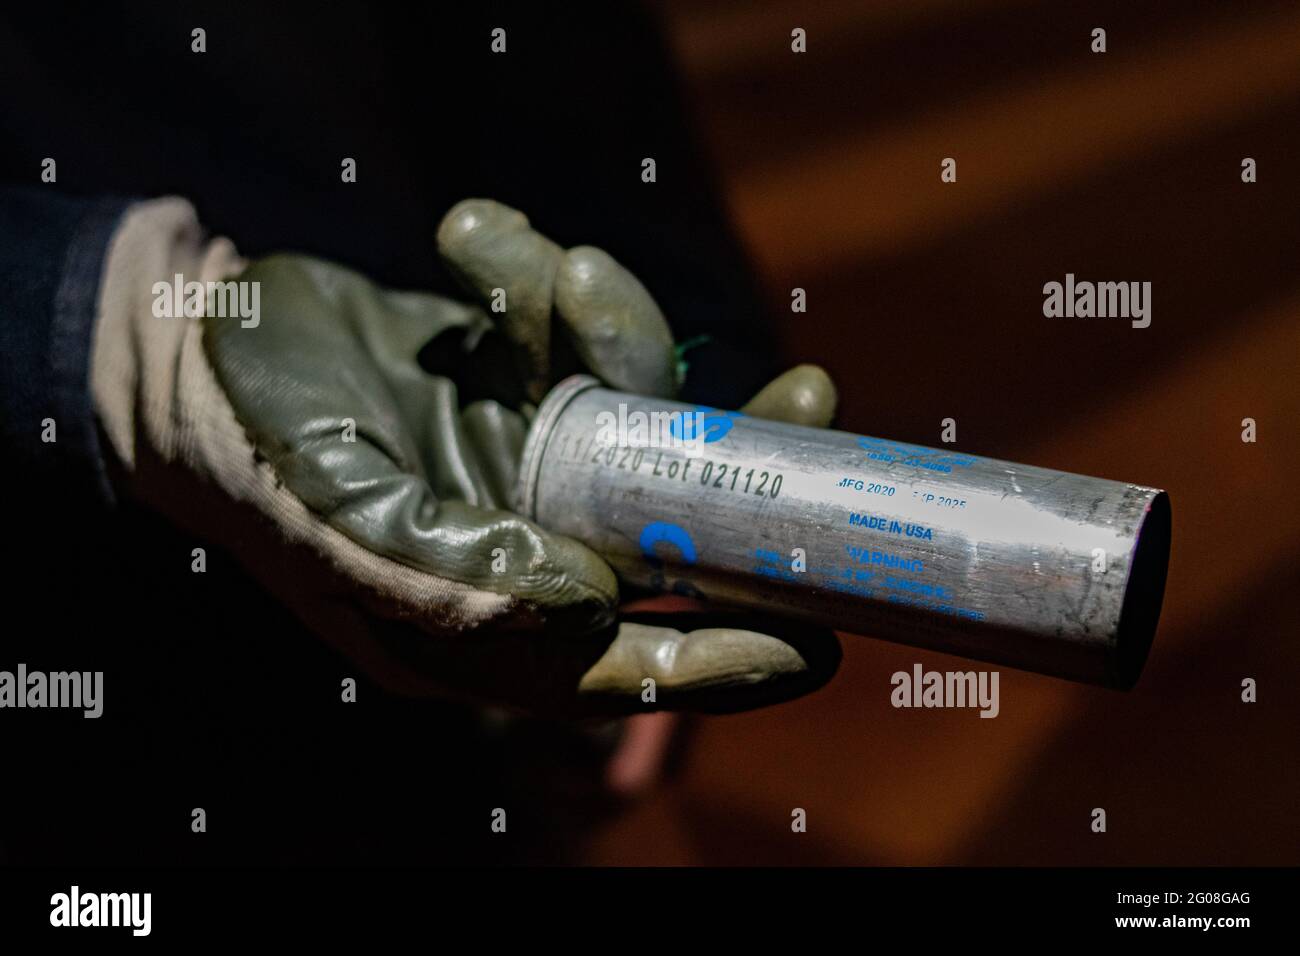 Medellin, Colombia on May 31, 2021. A demonstrator holds a canister of CS Tear gas made in the United States of America as a group of hooded demonstrators clashes with Colombia's riot police (ESMAD) in Medellin, Colombia during the on going anti government protests against Presiden Ivan Duque's tax and health reform and police brutality and unrest that leaves at least 70 dead during the past month, in Medellin, Colombia on May 31, 2021. Stock Photo